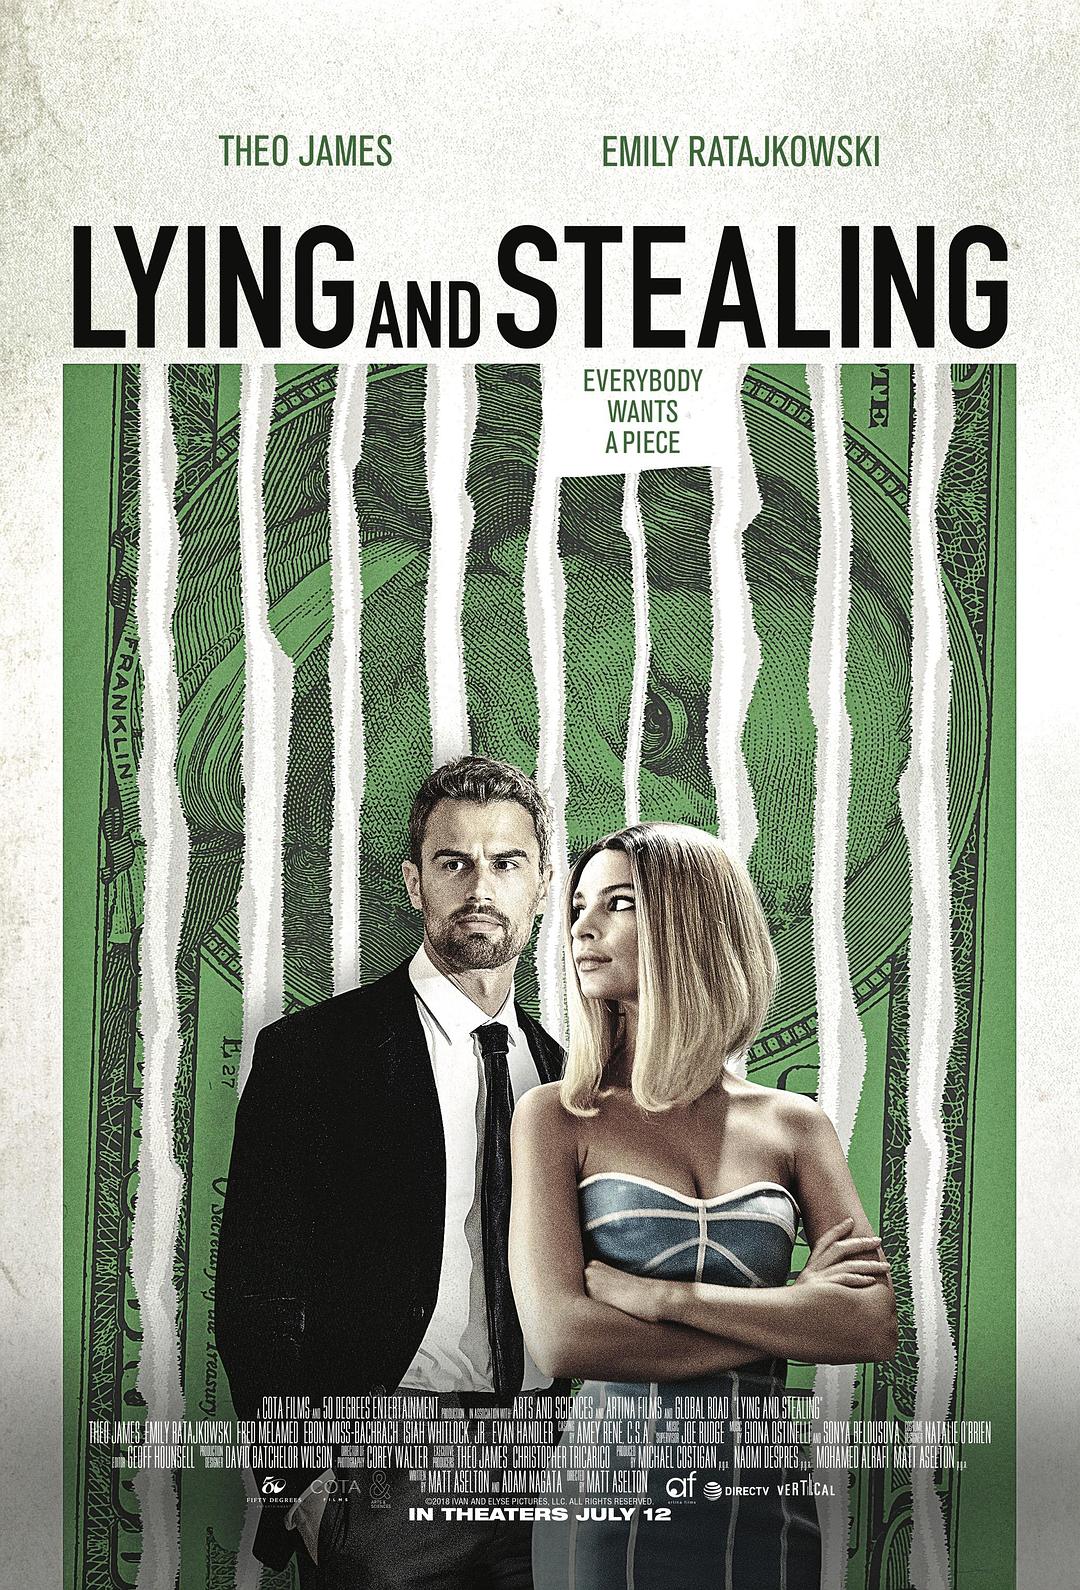 ͵ Lying.And.Stealing.2019.1080p.BluRay.REMUX.AVC.DTS-HD.MA.TrueHD.5.1-FGT 28-1.png